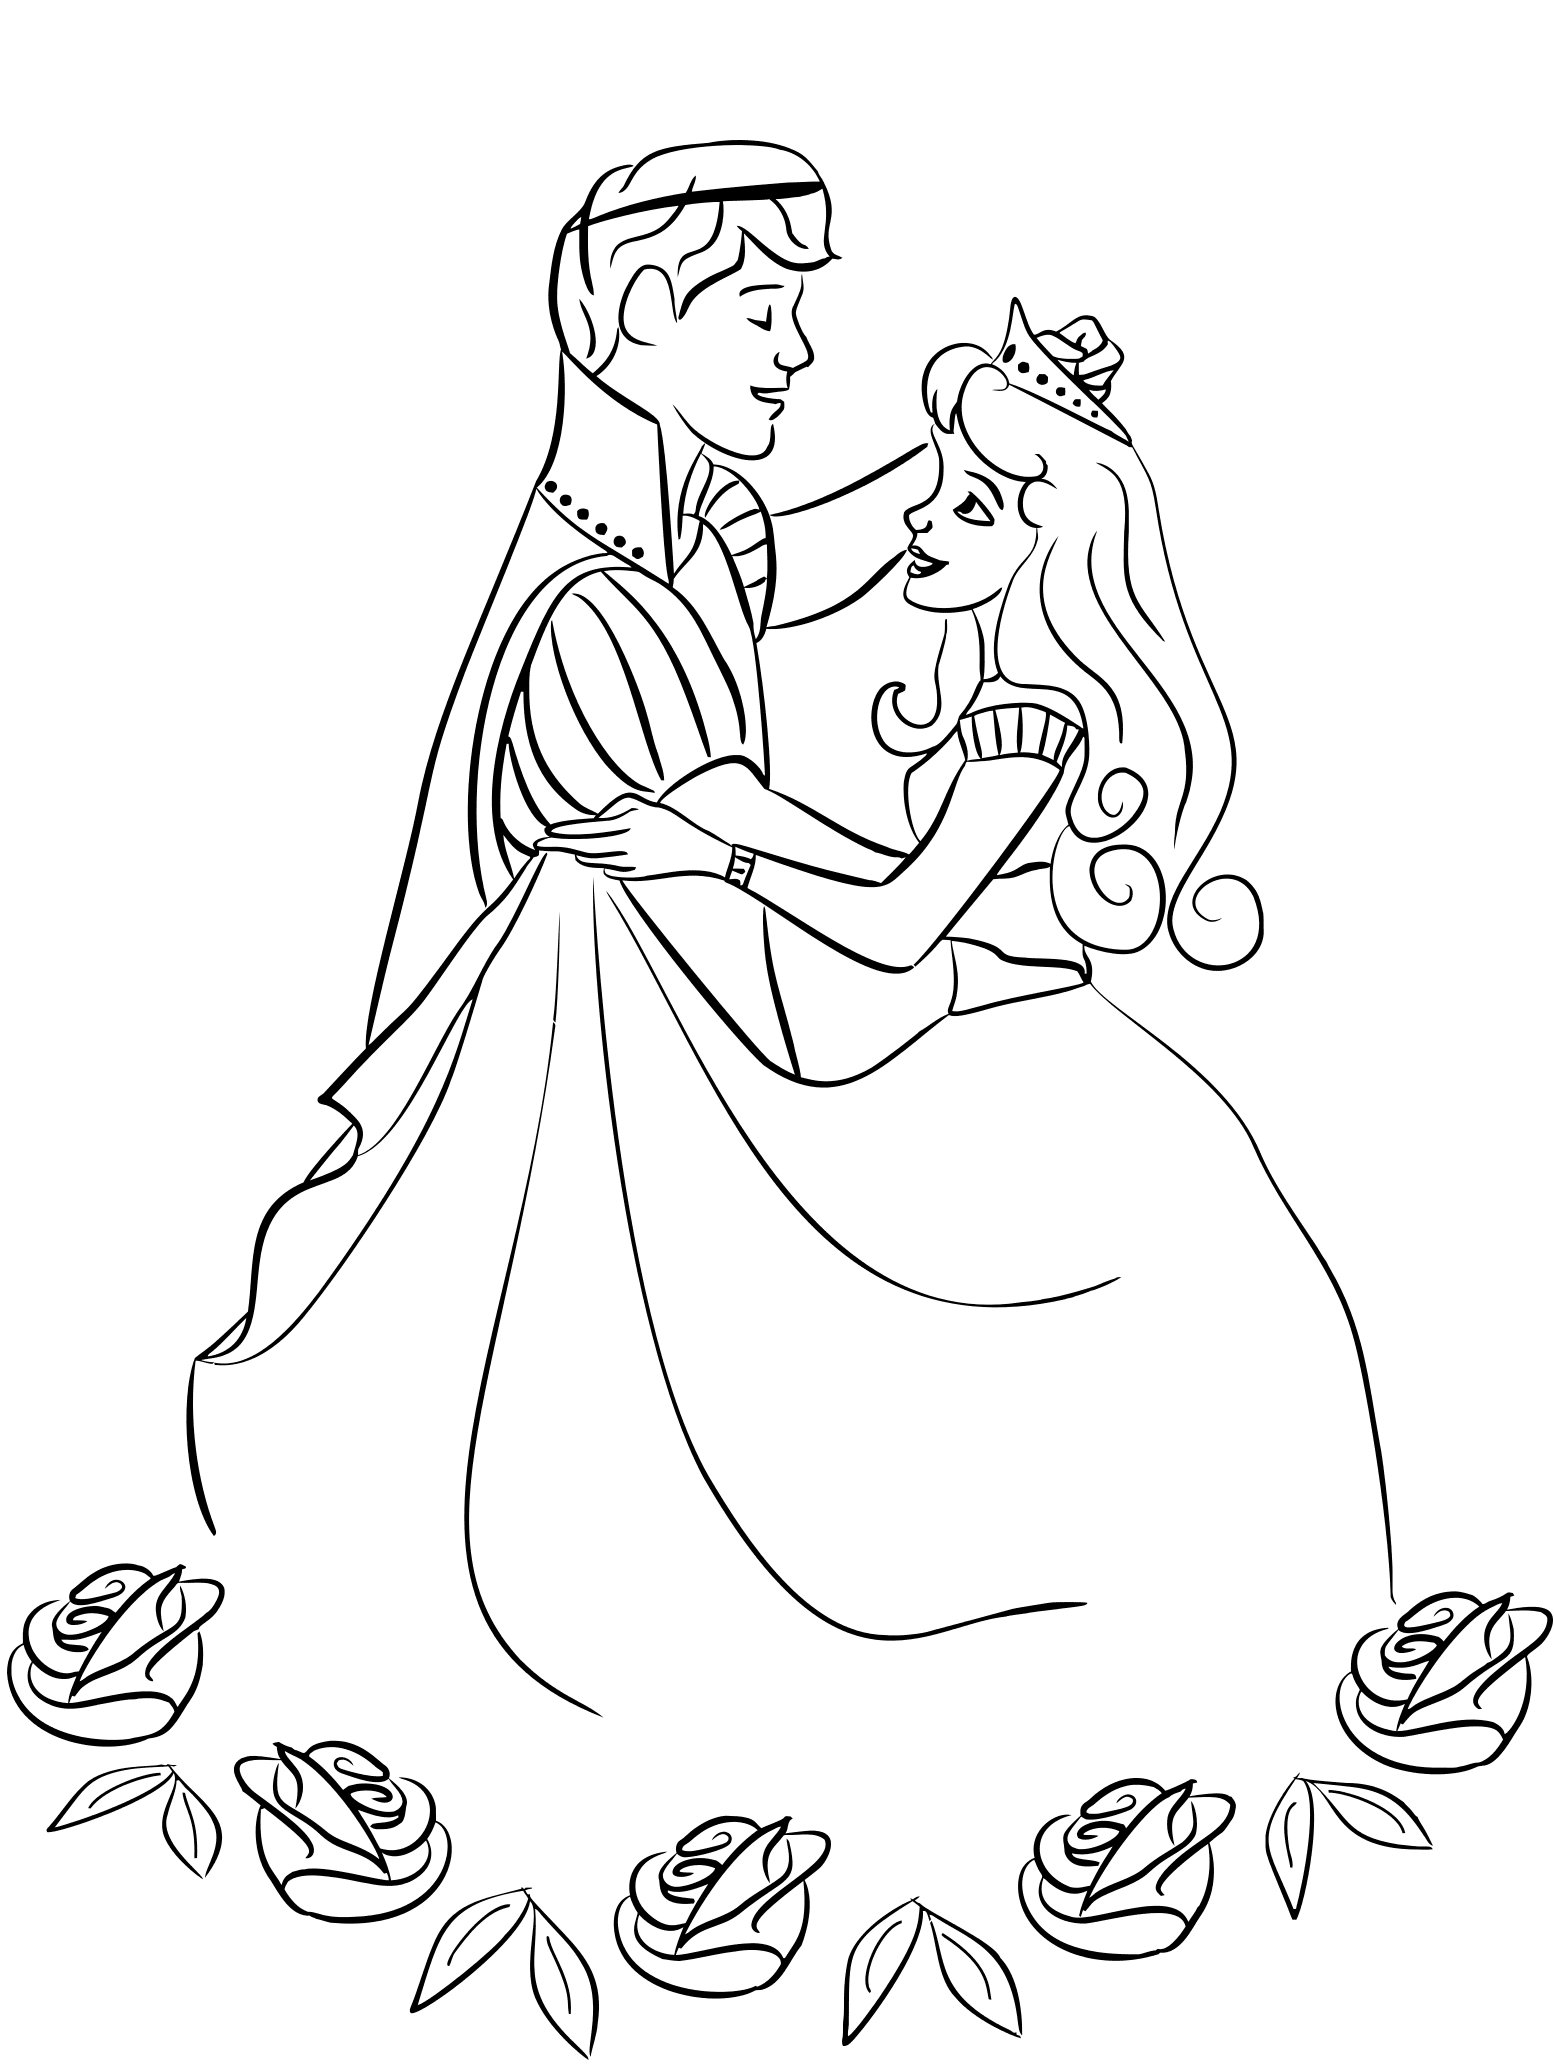 Prince And Princess Dancing Coloring Pages   Coloring Cool